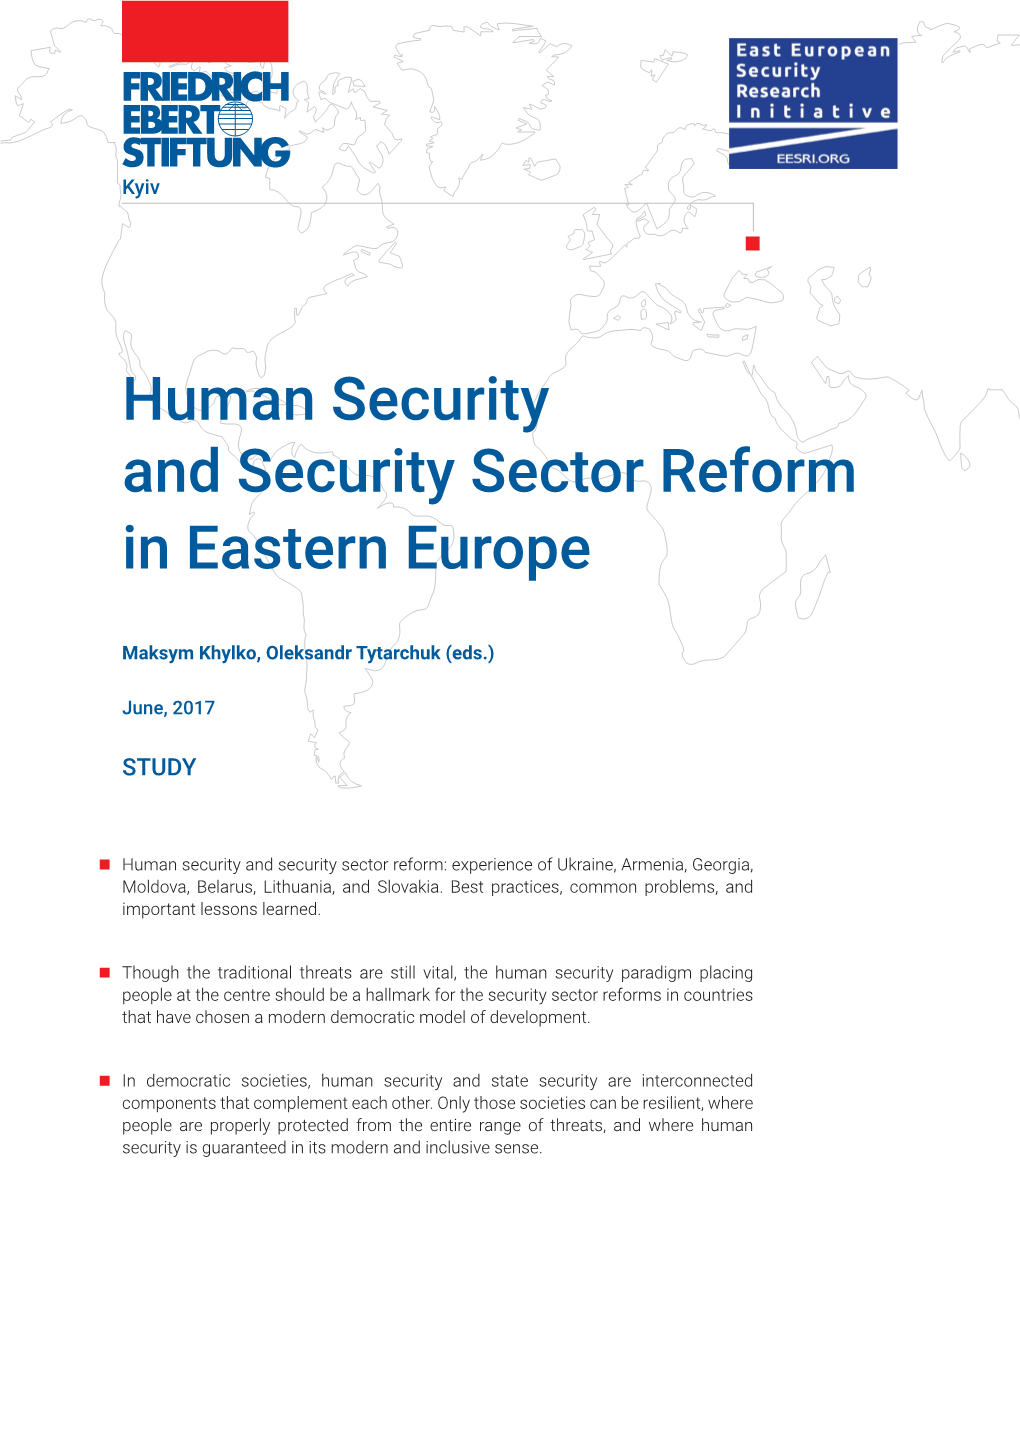 Human Security and Security Sector Reform in Eastern Europe